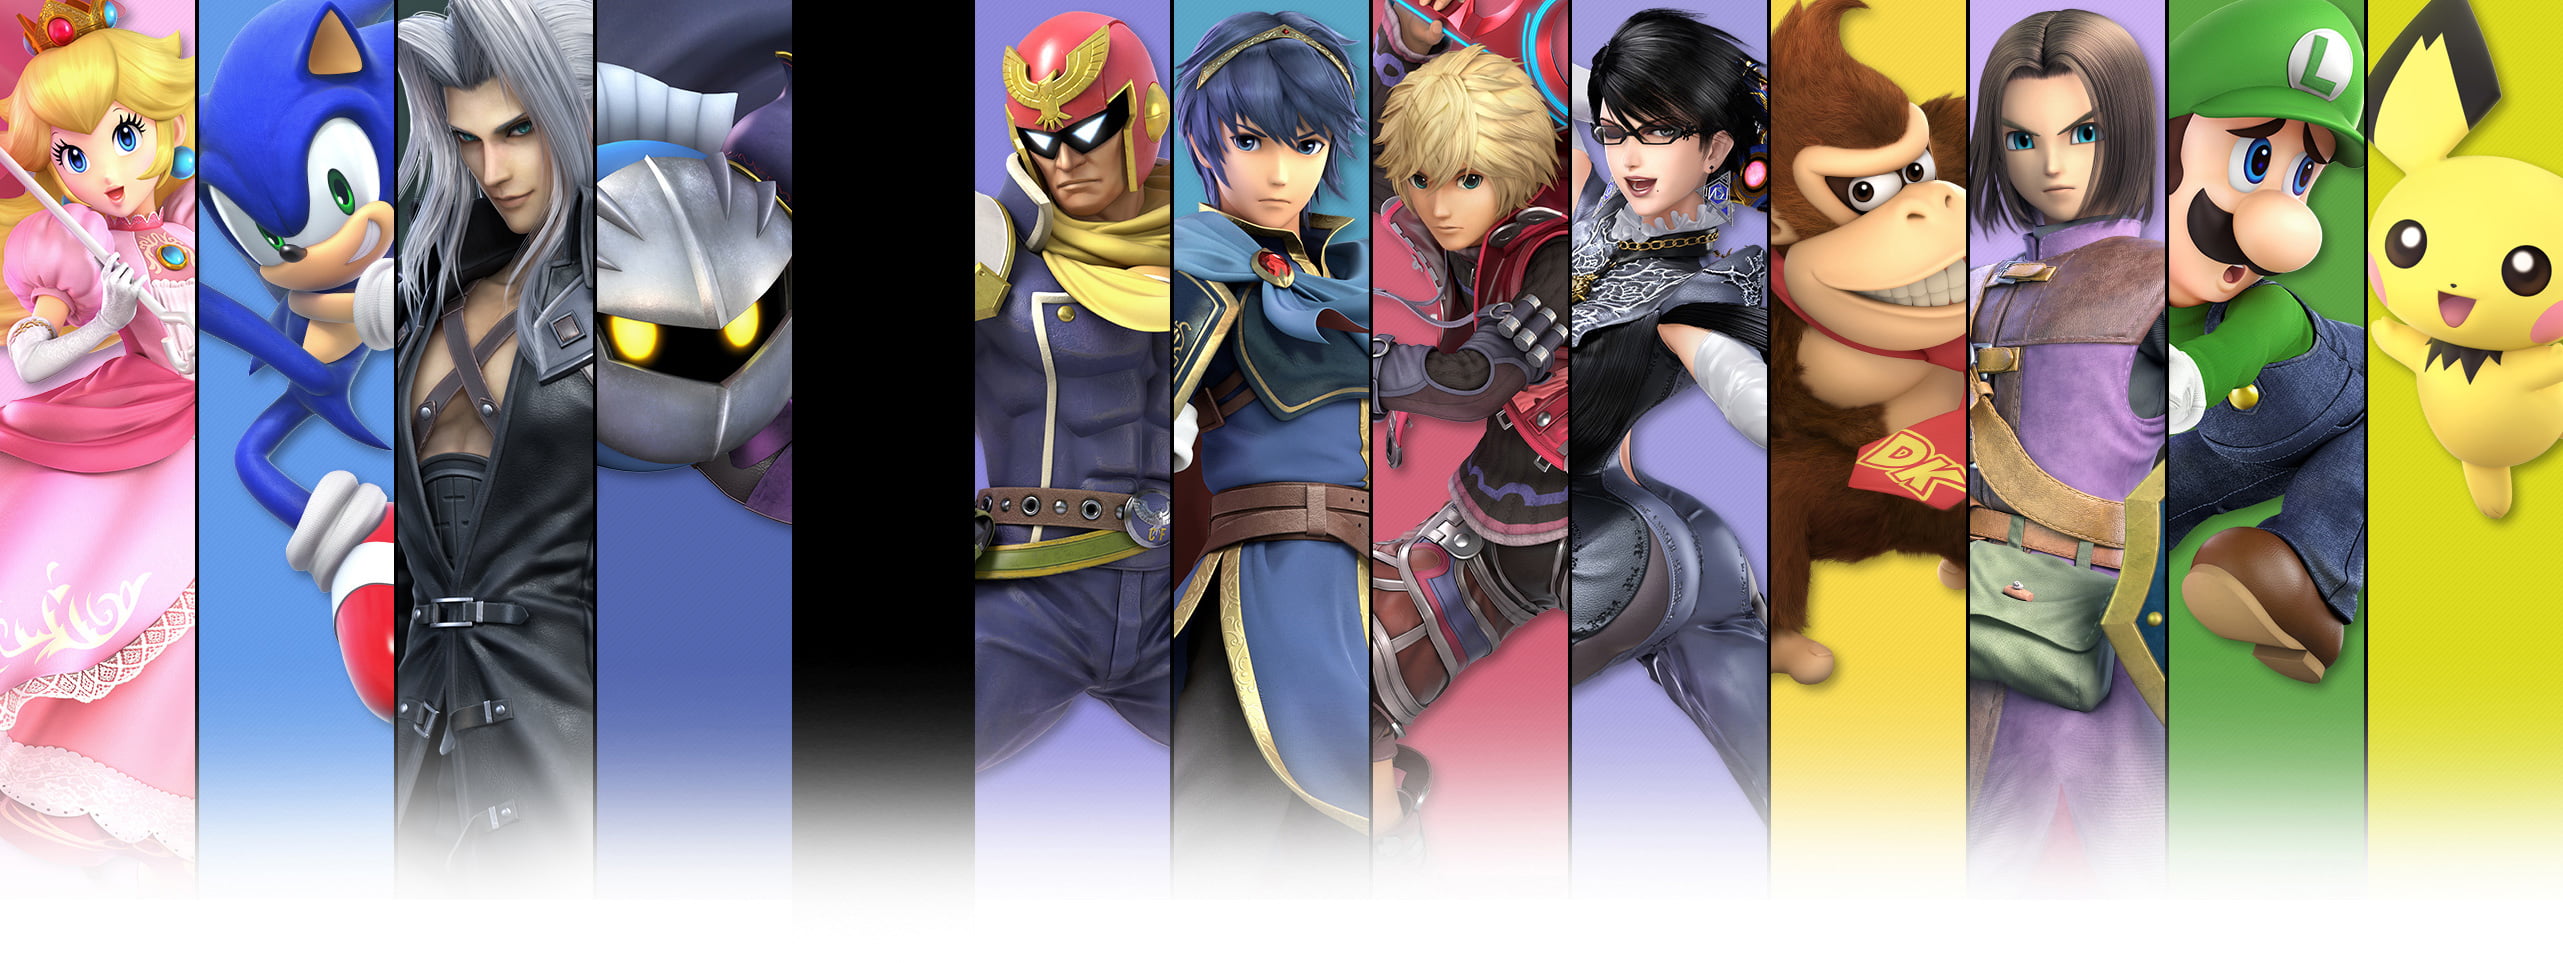 SUPER SMASH BROS. ULTIMATE: Masahiro Sakurai Has Admitted That There Are  Too Many Sword Users